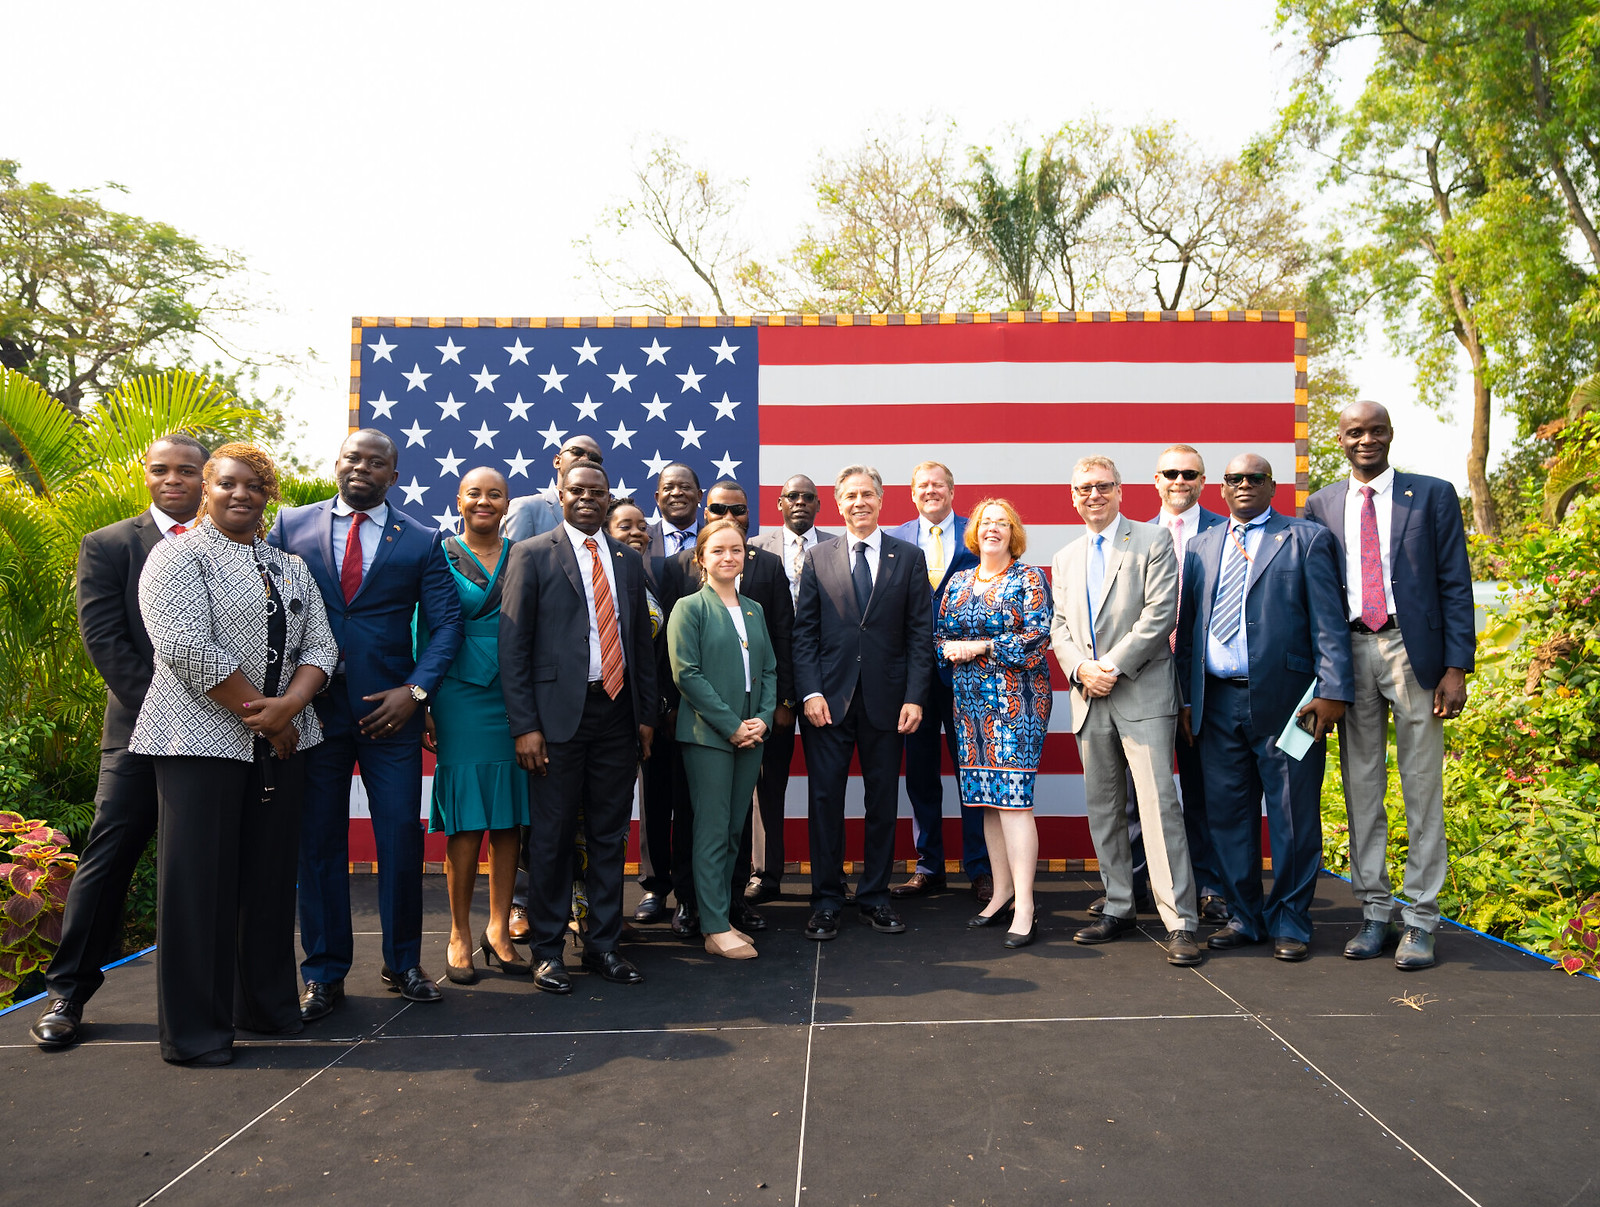 Secretary of State Antony J. Blinken poses for a photo with employees and families from U.S. Embassy Kinshasa in Kinshasa, Democratic Republic of the Congo. They are all standing in front of a large U.S. flag with trees on both sides.